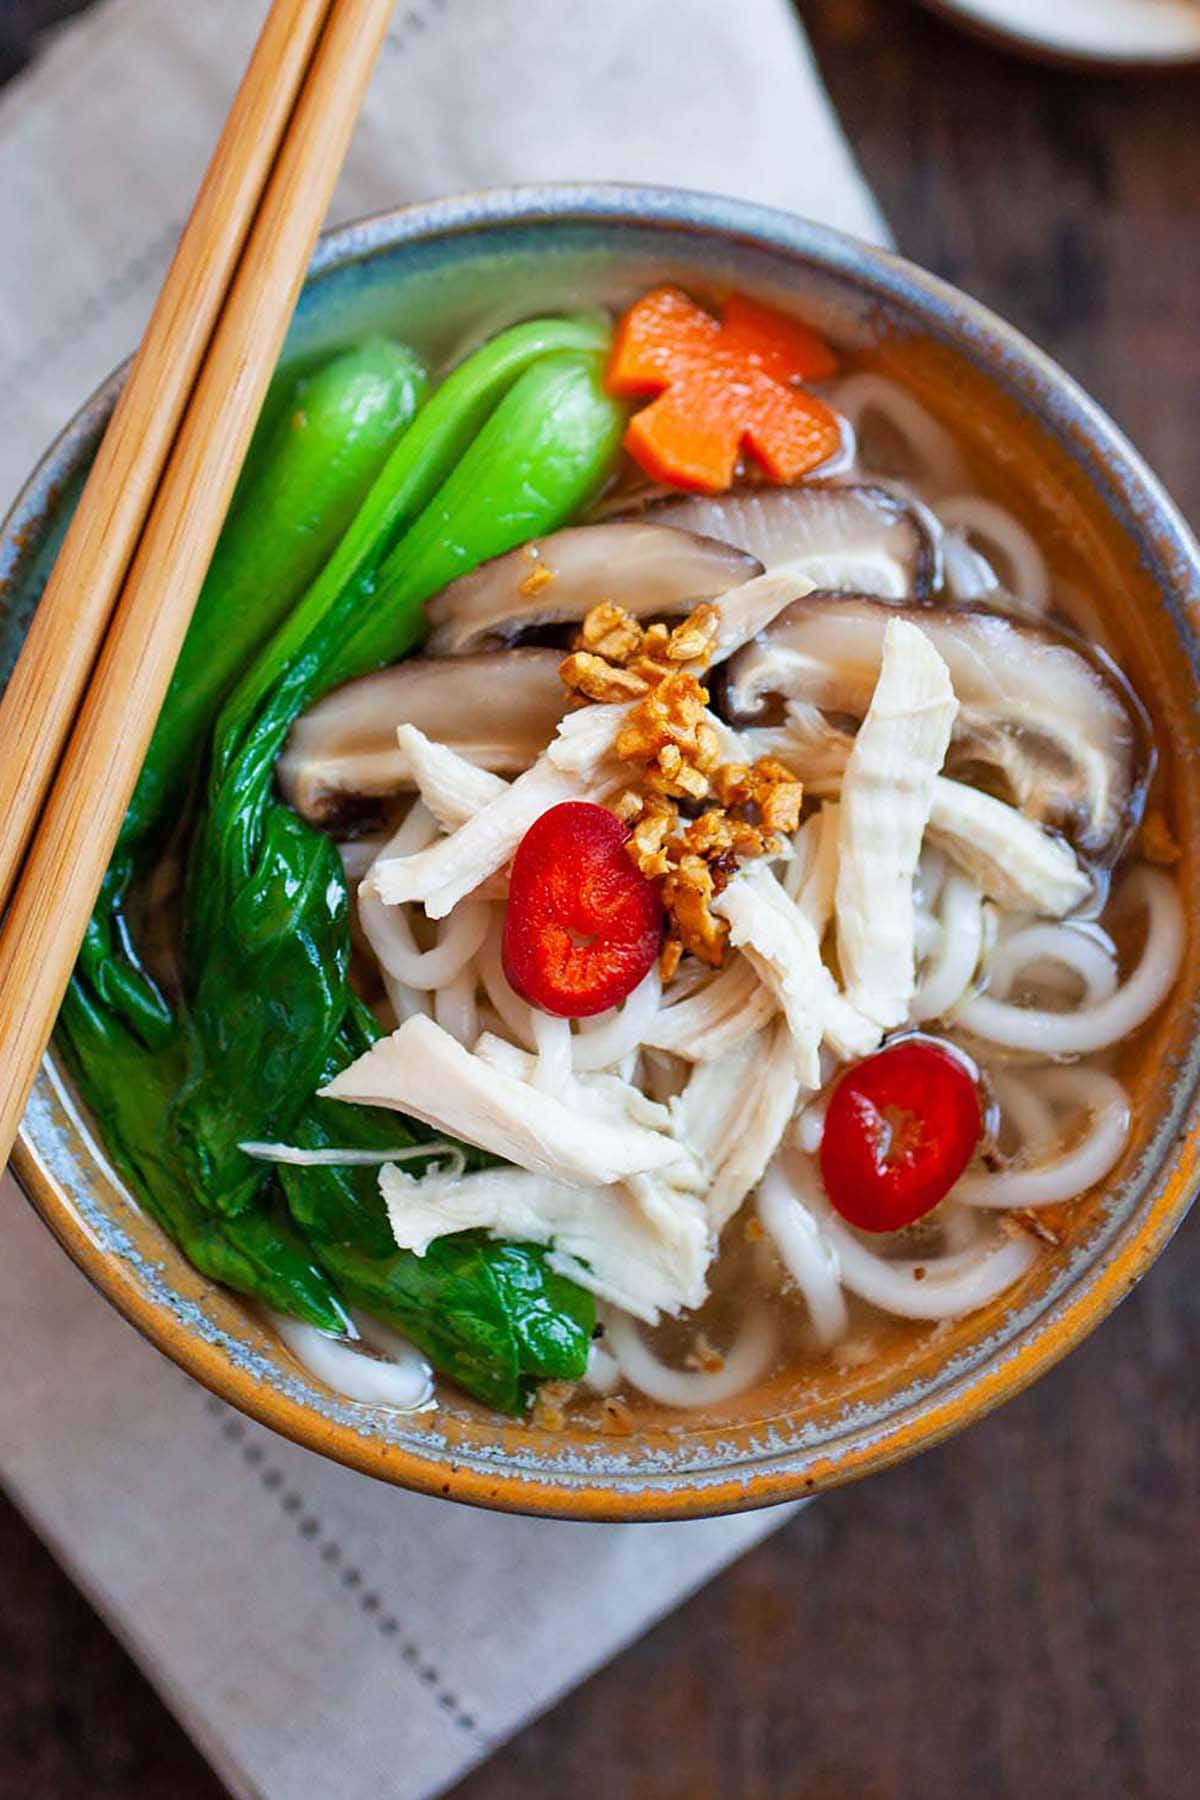 Asian noodle soup with chicken, bok choy vegetables and noodles in a bowl.